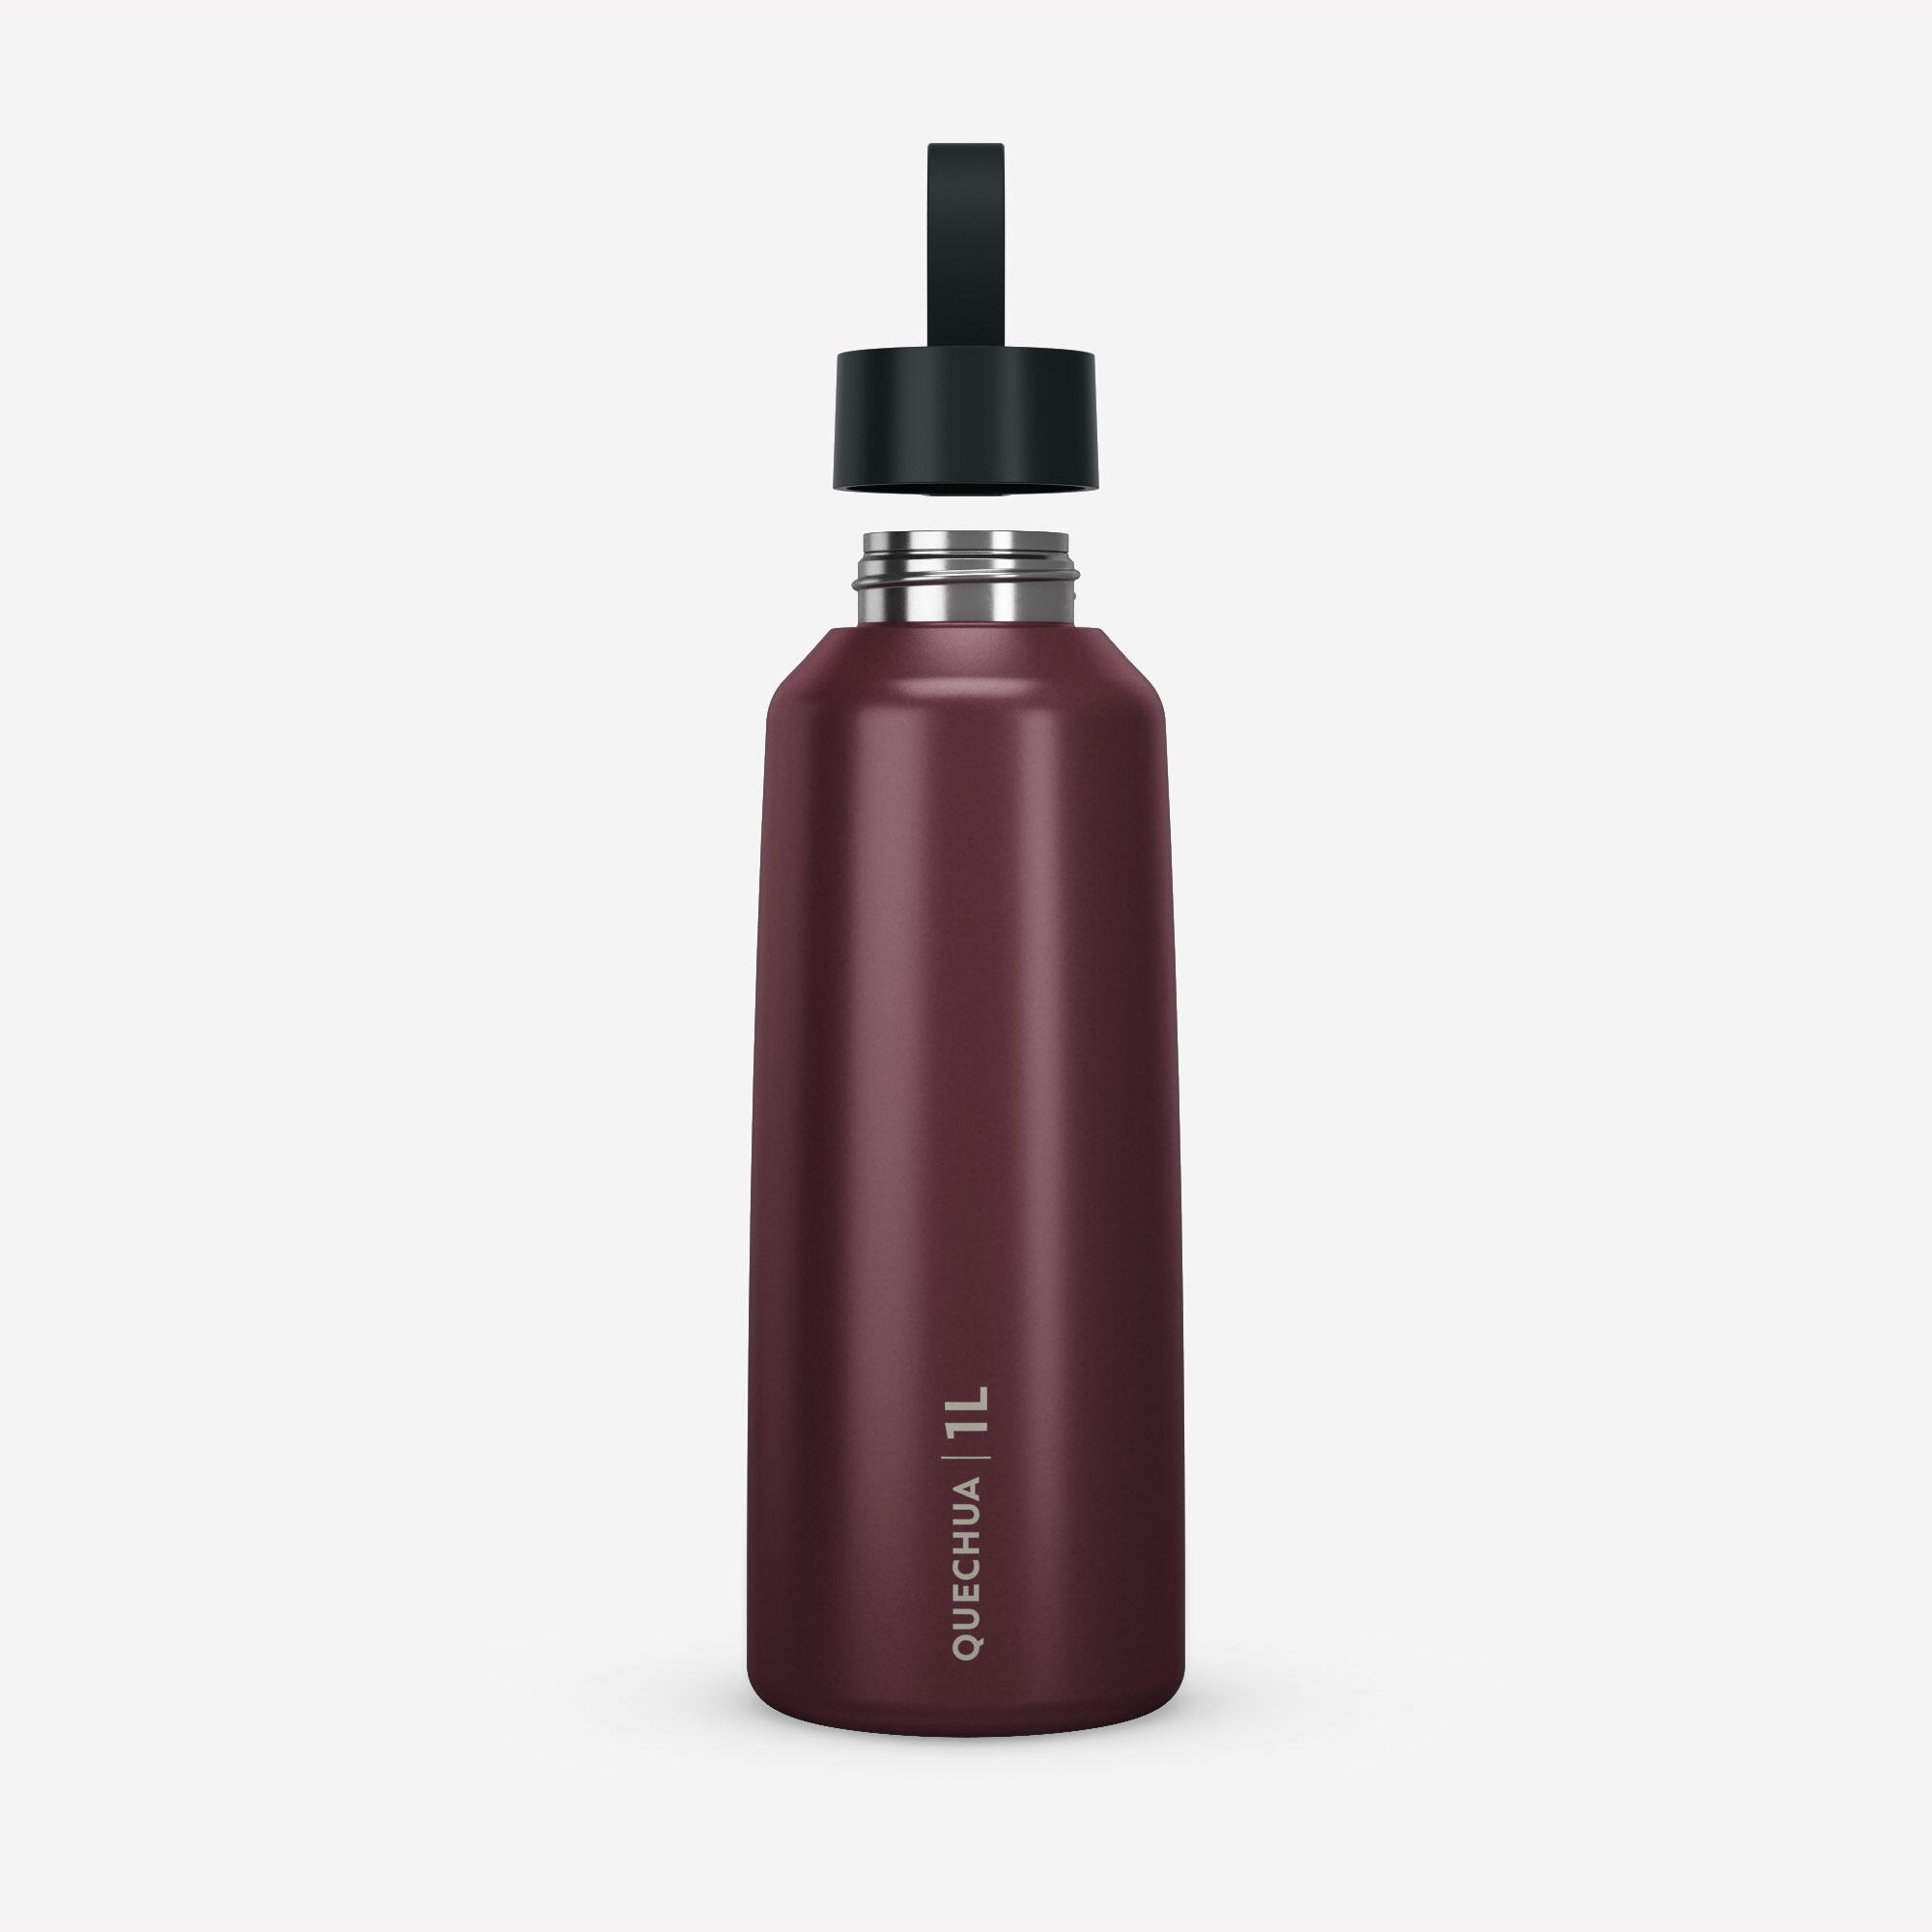 1 L stainless steel water bottle with screw cap for hiking 3/10